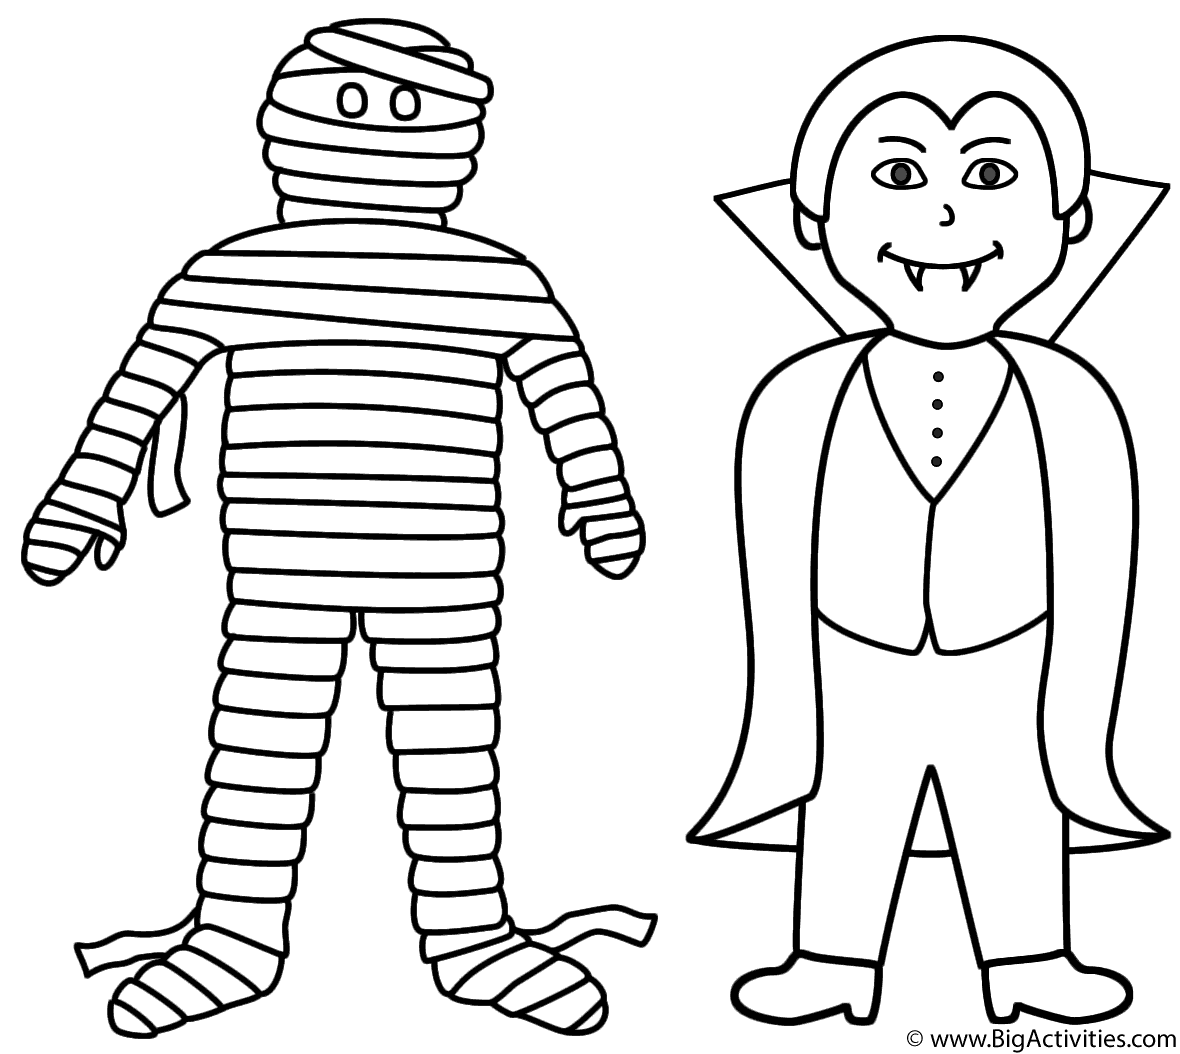 Mummy with vampire - Coloring Page (Halloween)